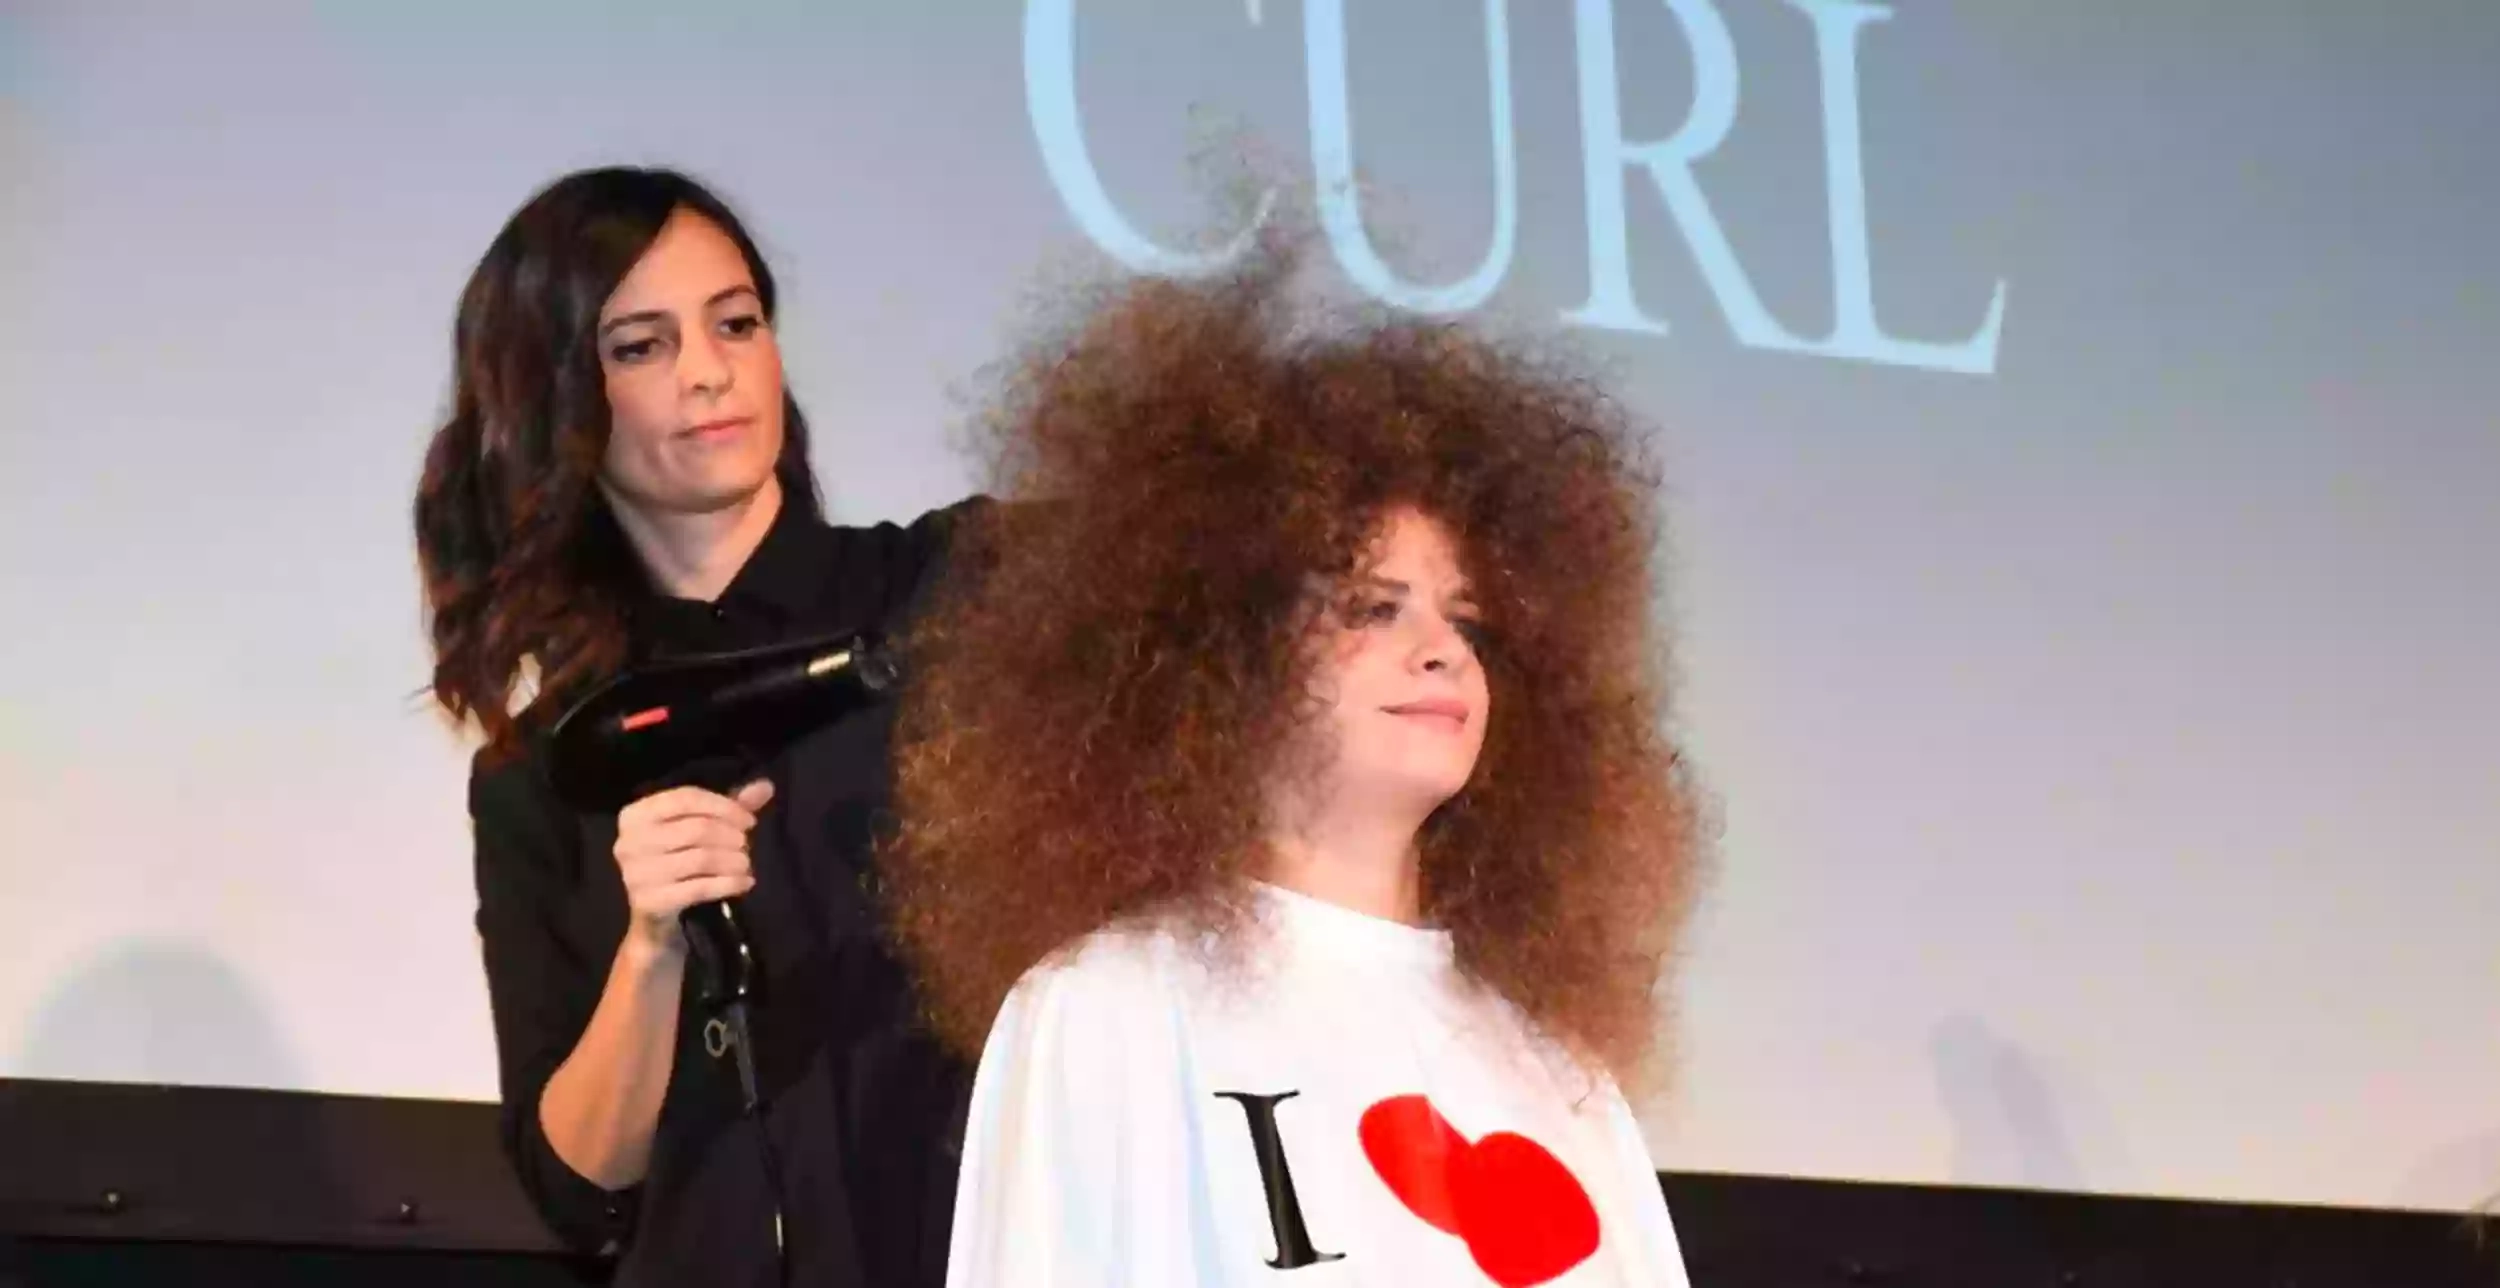 I LOVE CURL MONCALIERI BY ROSSANA